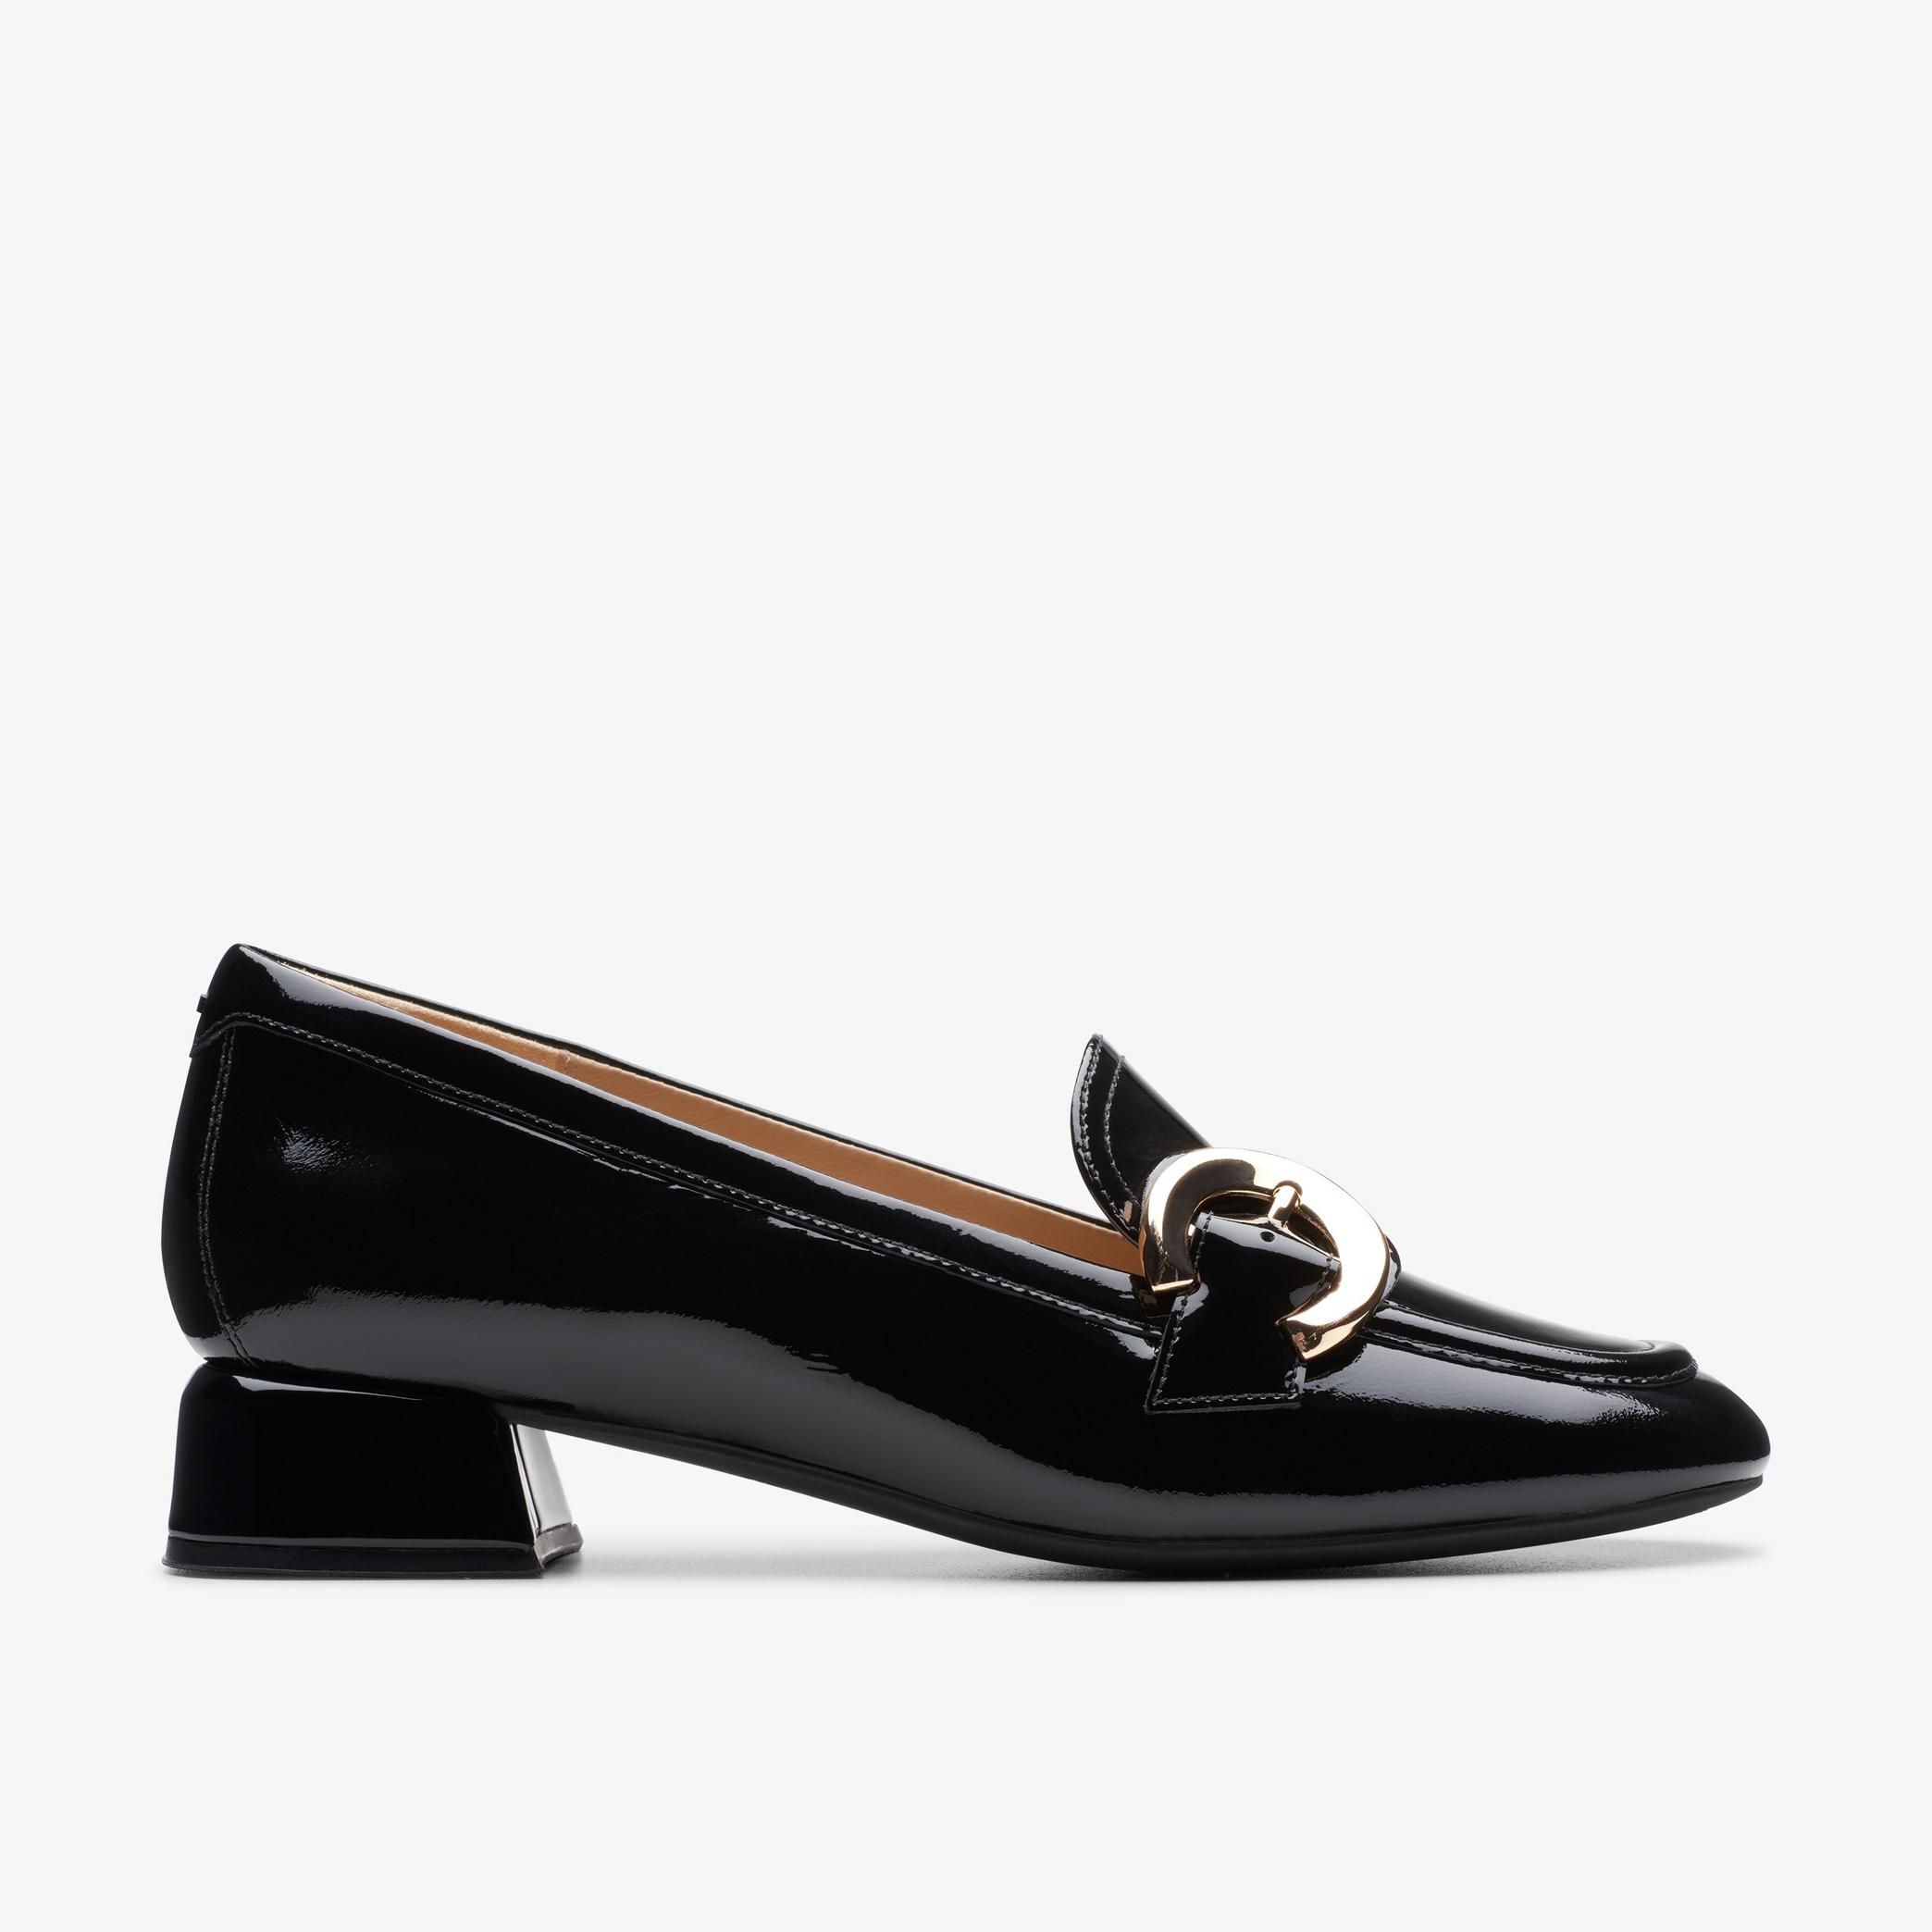 WOMENS Daiss 30 Trim Black Patent Loafers | Clarks US